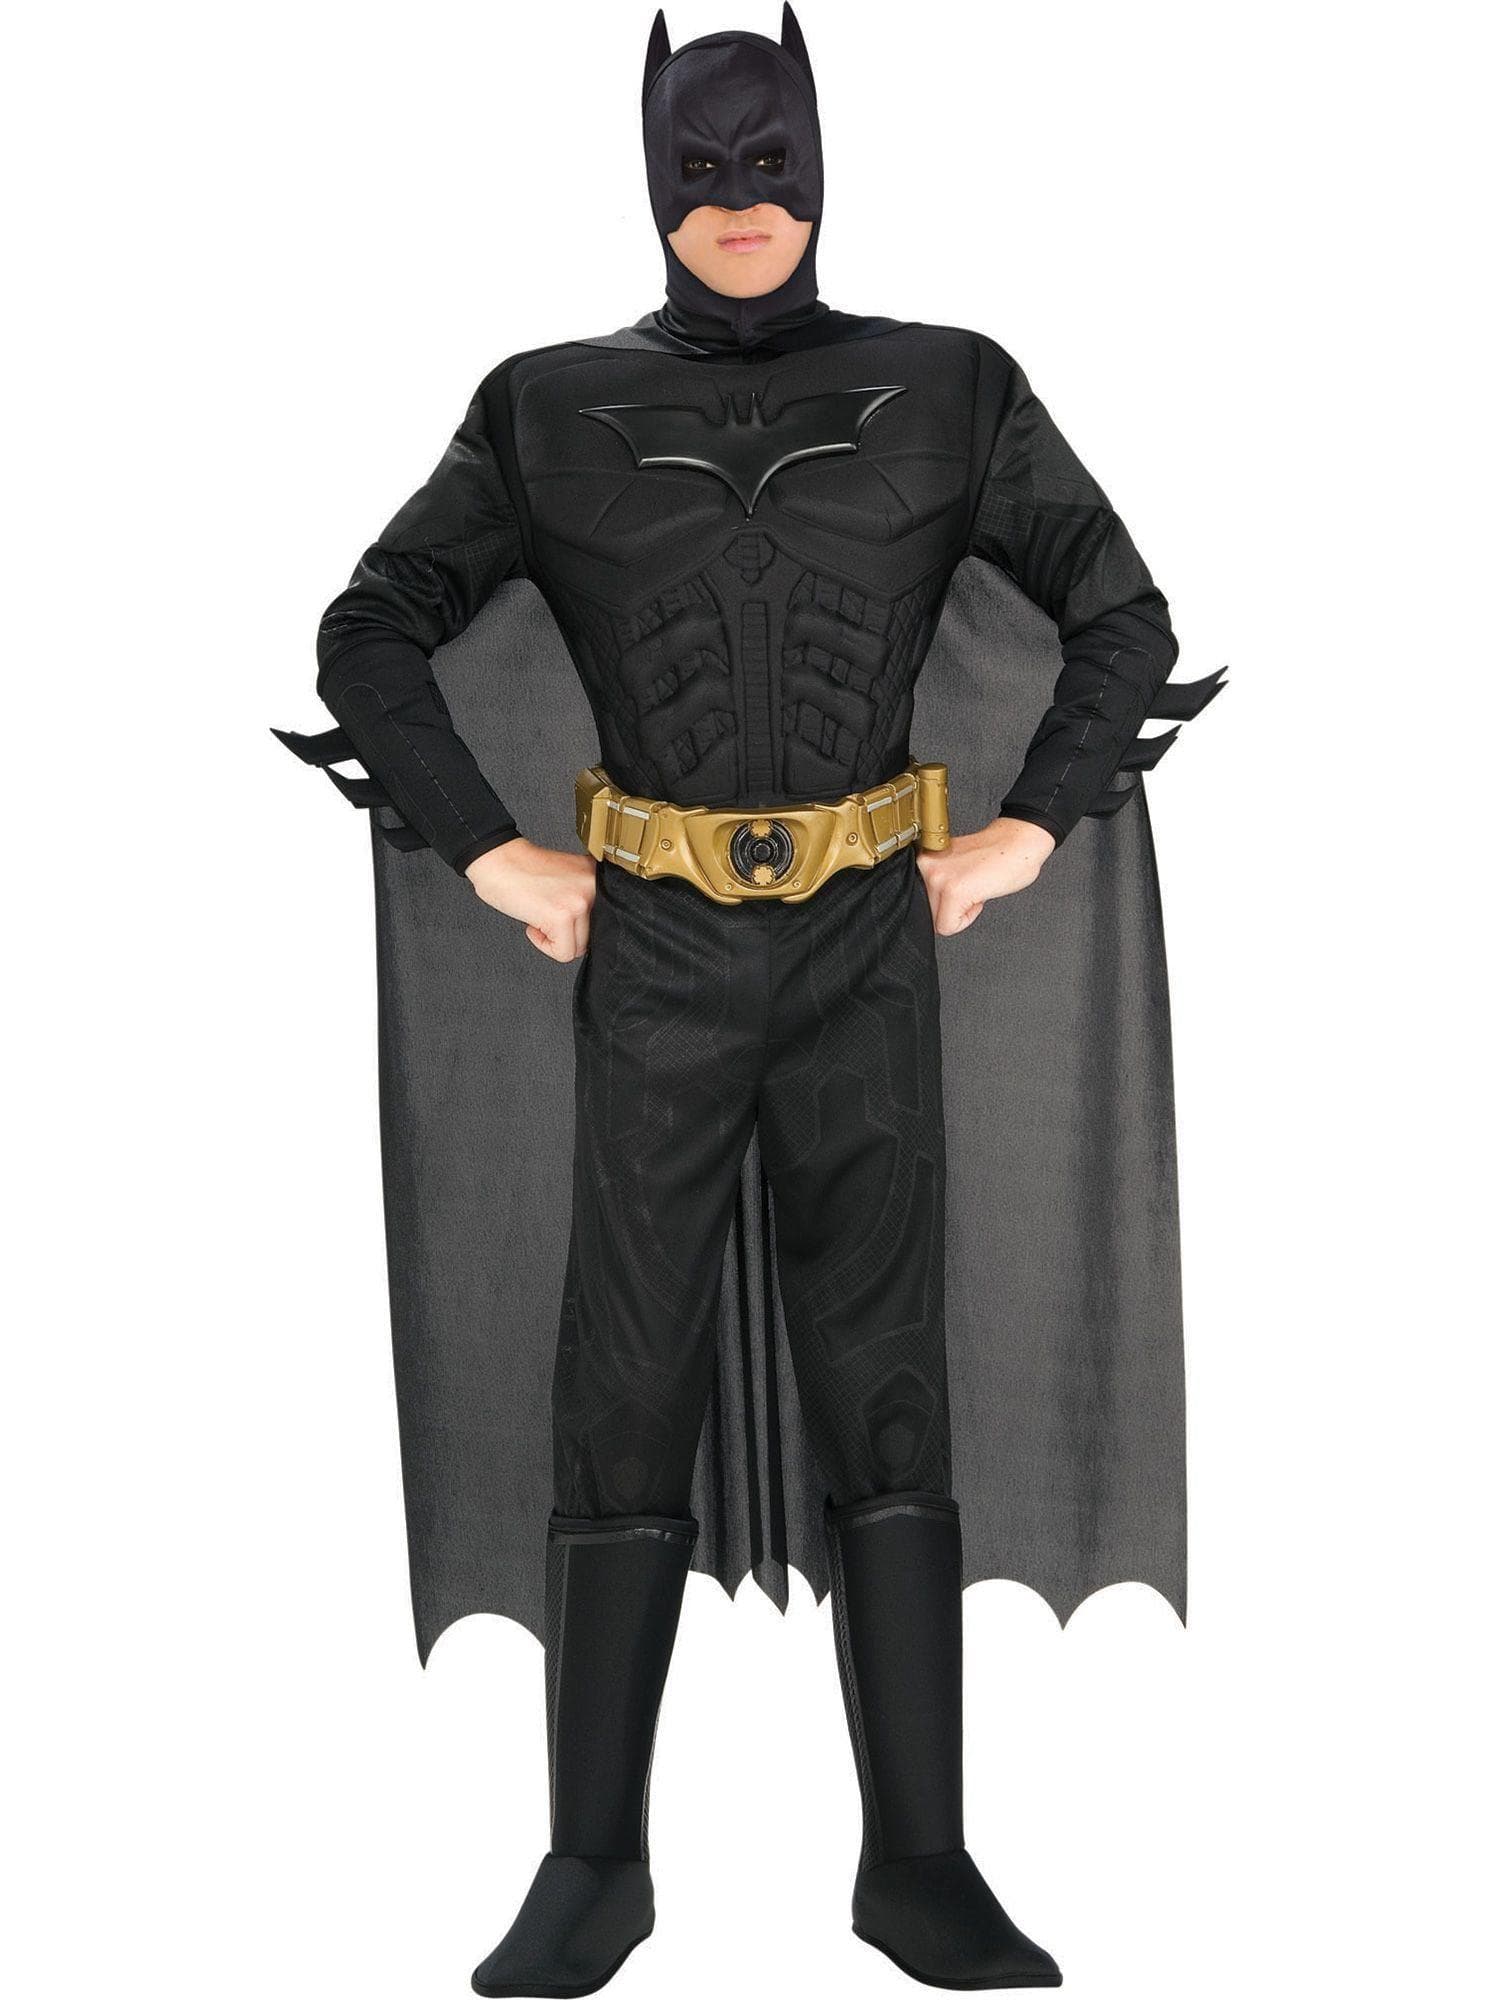 Adult Dark Knight Batman Deluxe Muscle Chest Costume - costumes.com